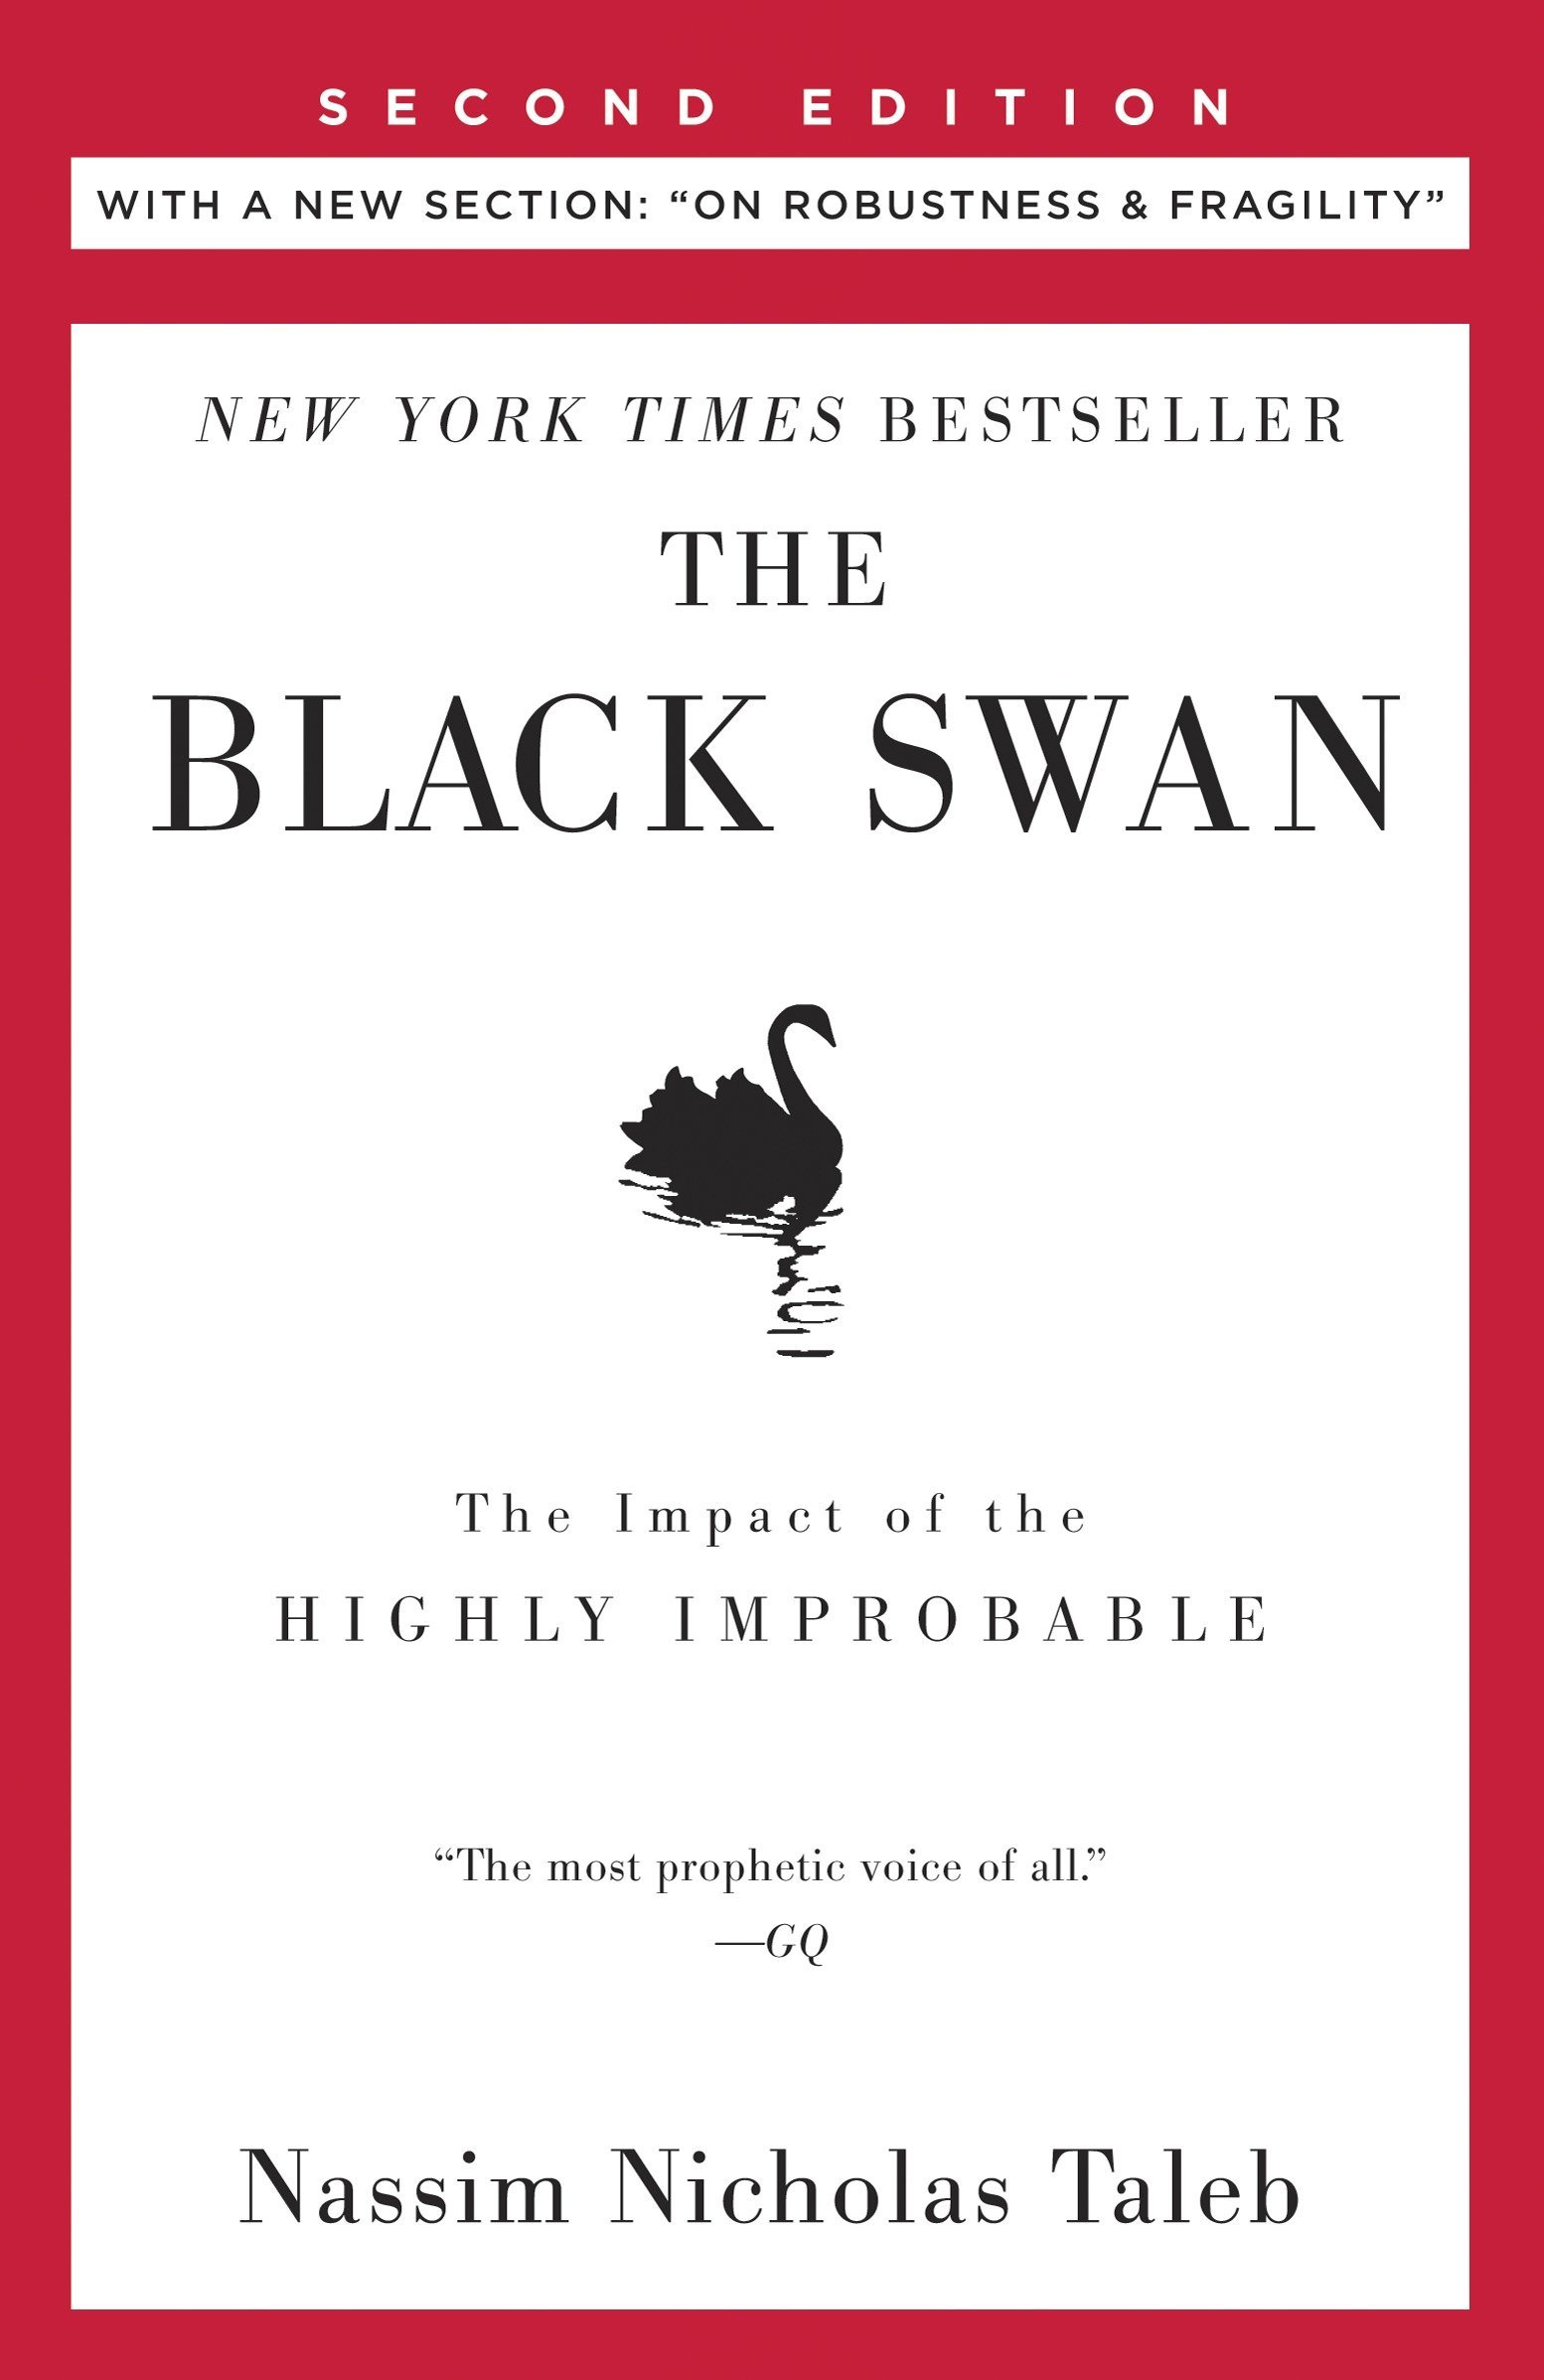 The book cover for The Black Swan.